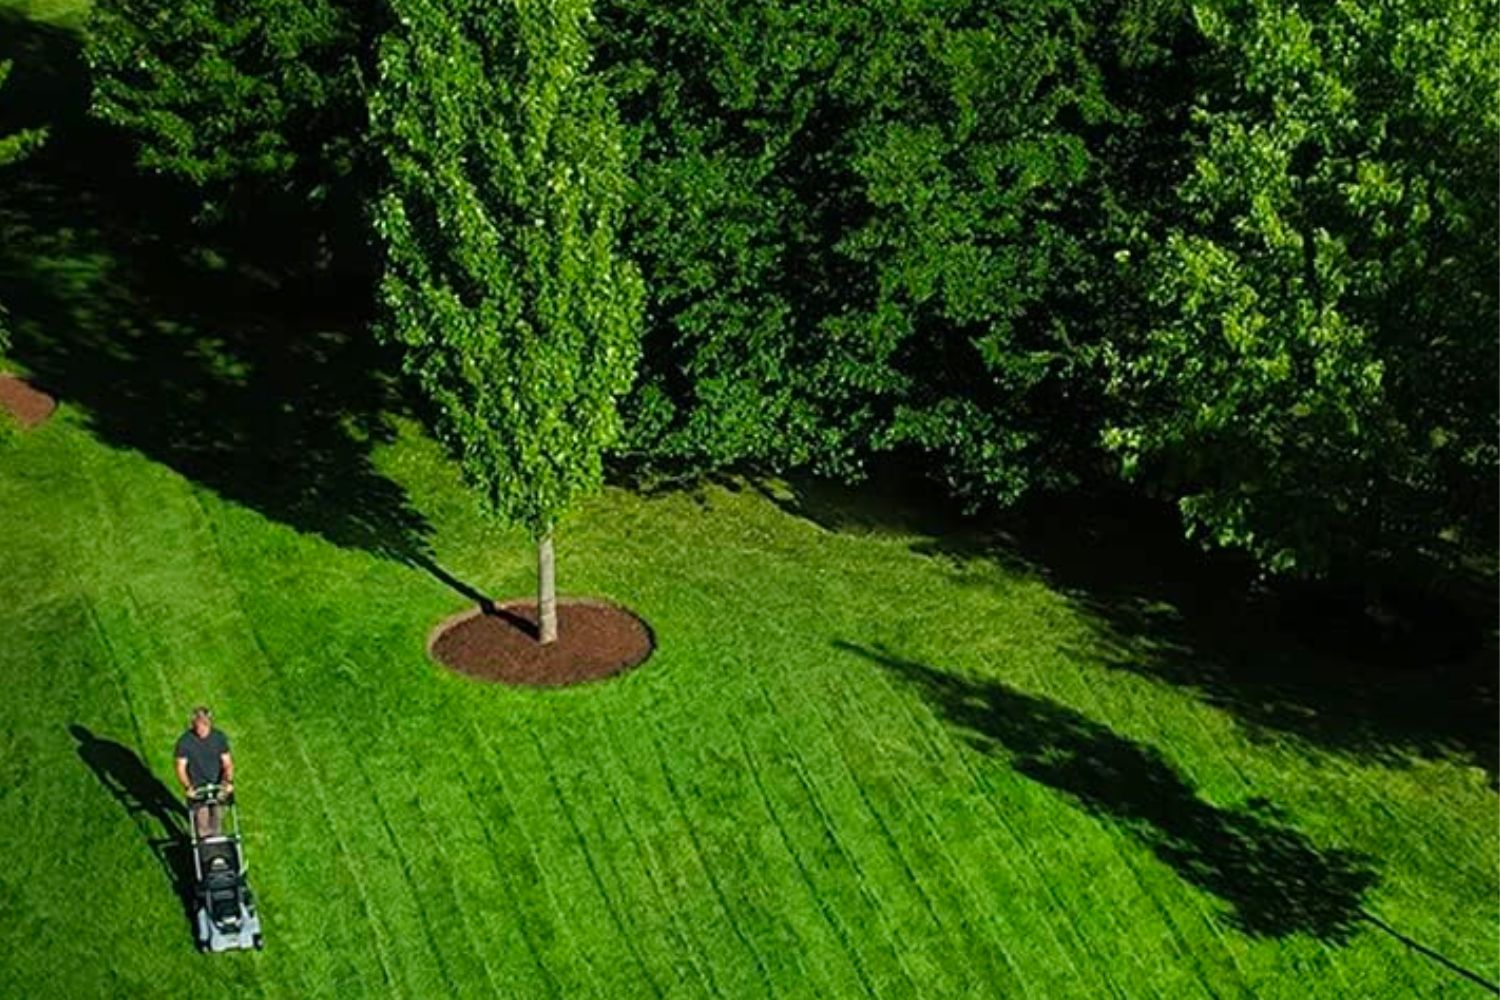 A distant overhead shot of a large lawn being mowed by the best self-propelled lawn mower option